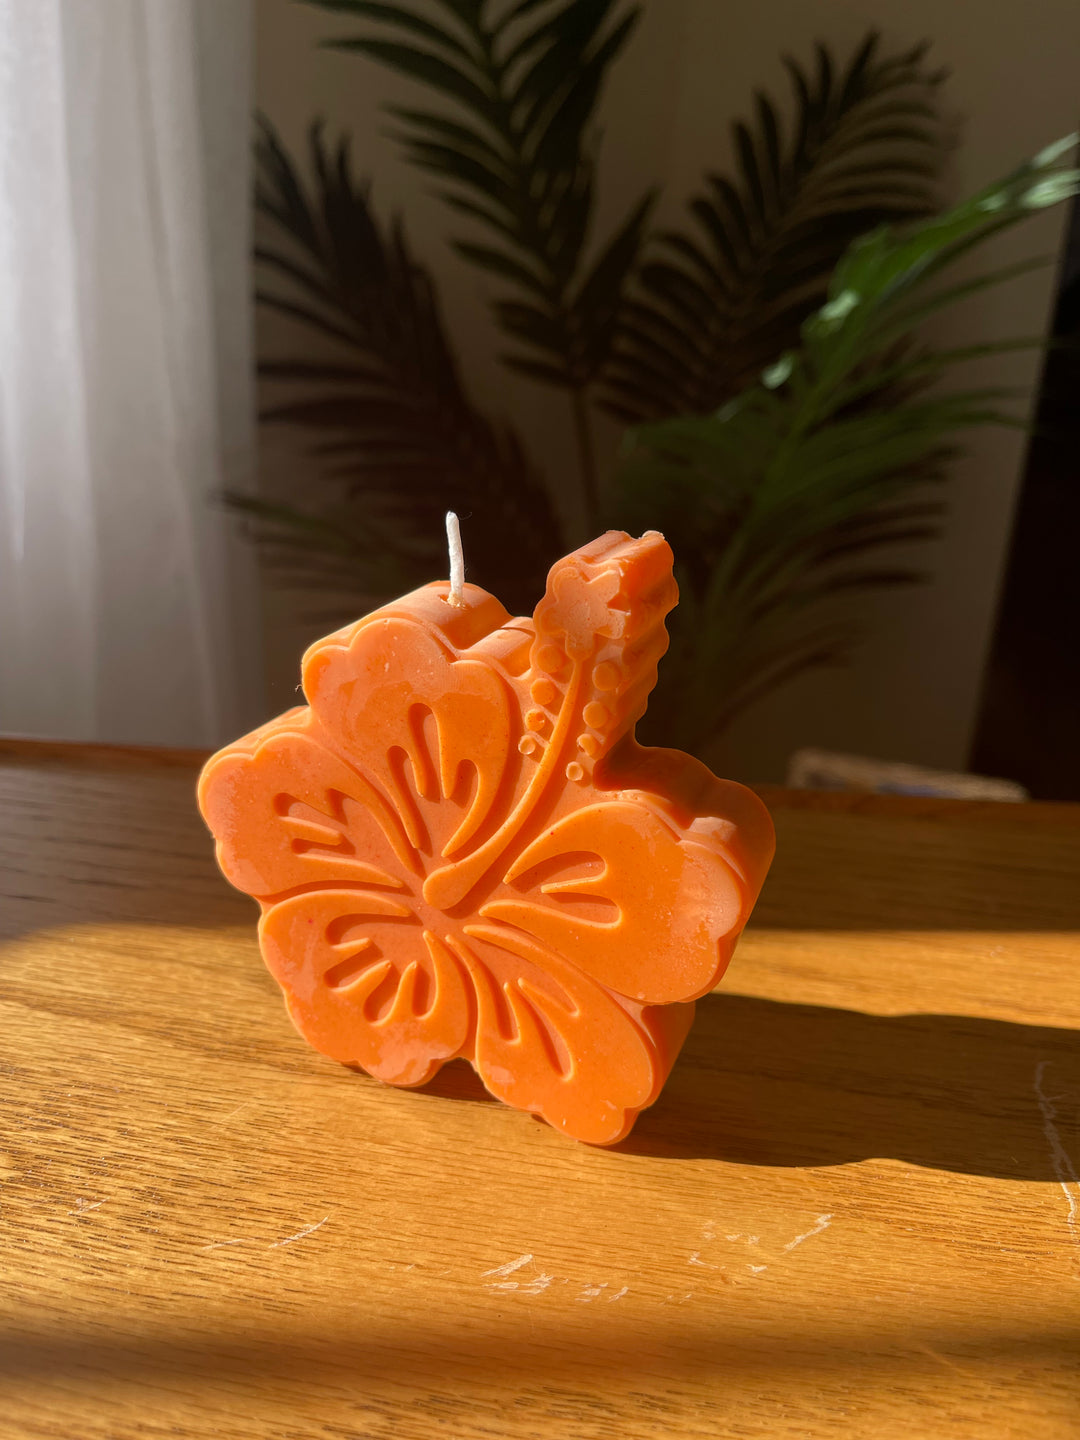 The Hibiscus candle